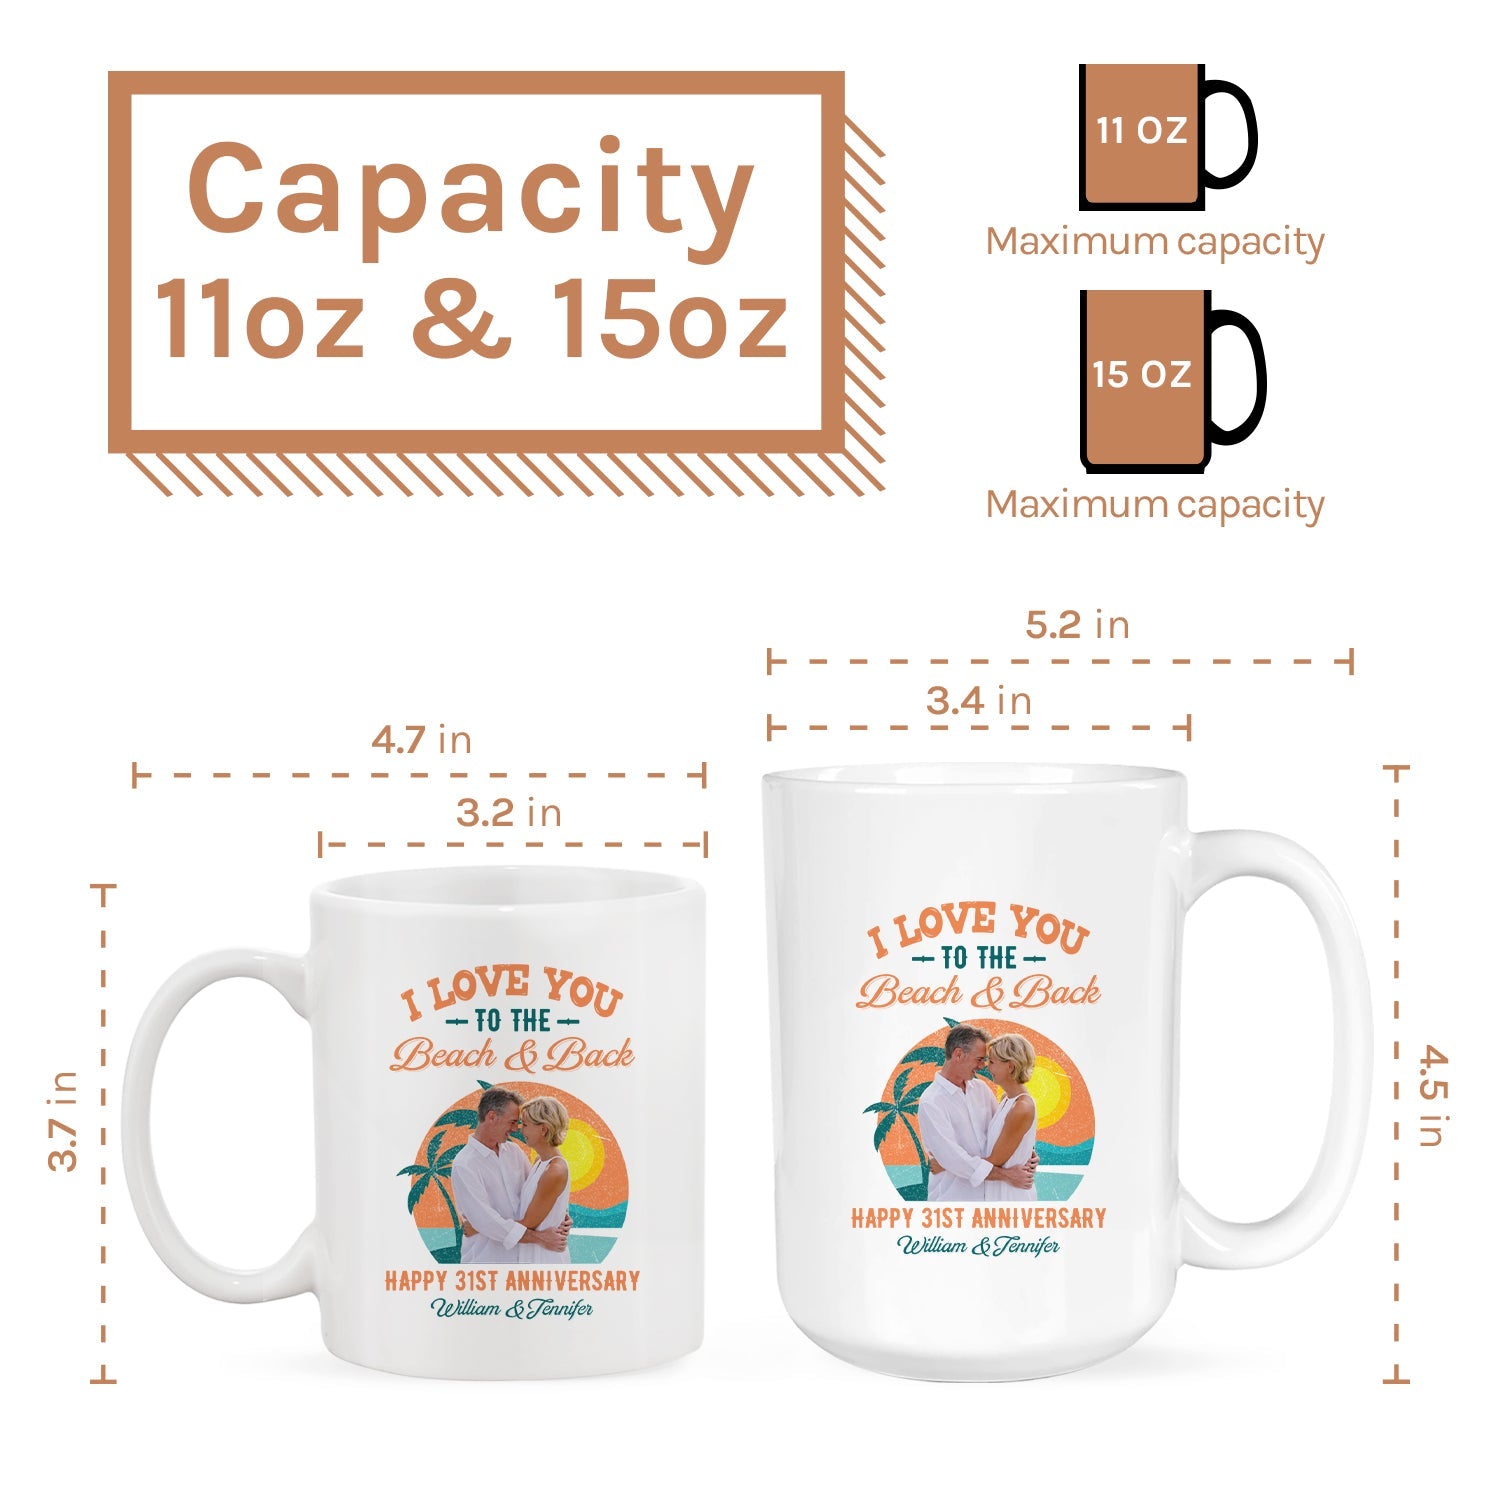 I Love You To The Beach And Back - Personalized 31 Year Anniversary gift For Parents, Husband or Wife - Custom Mug - MyMindfulGifts